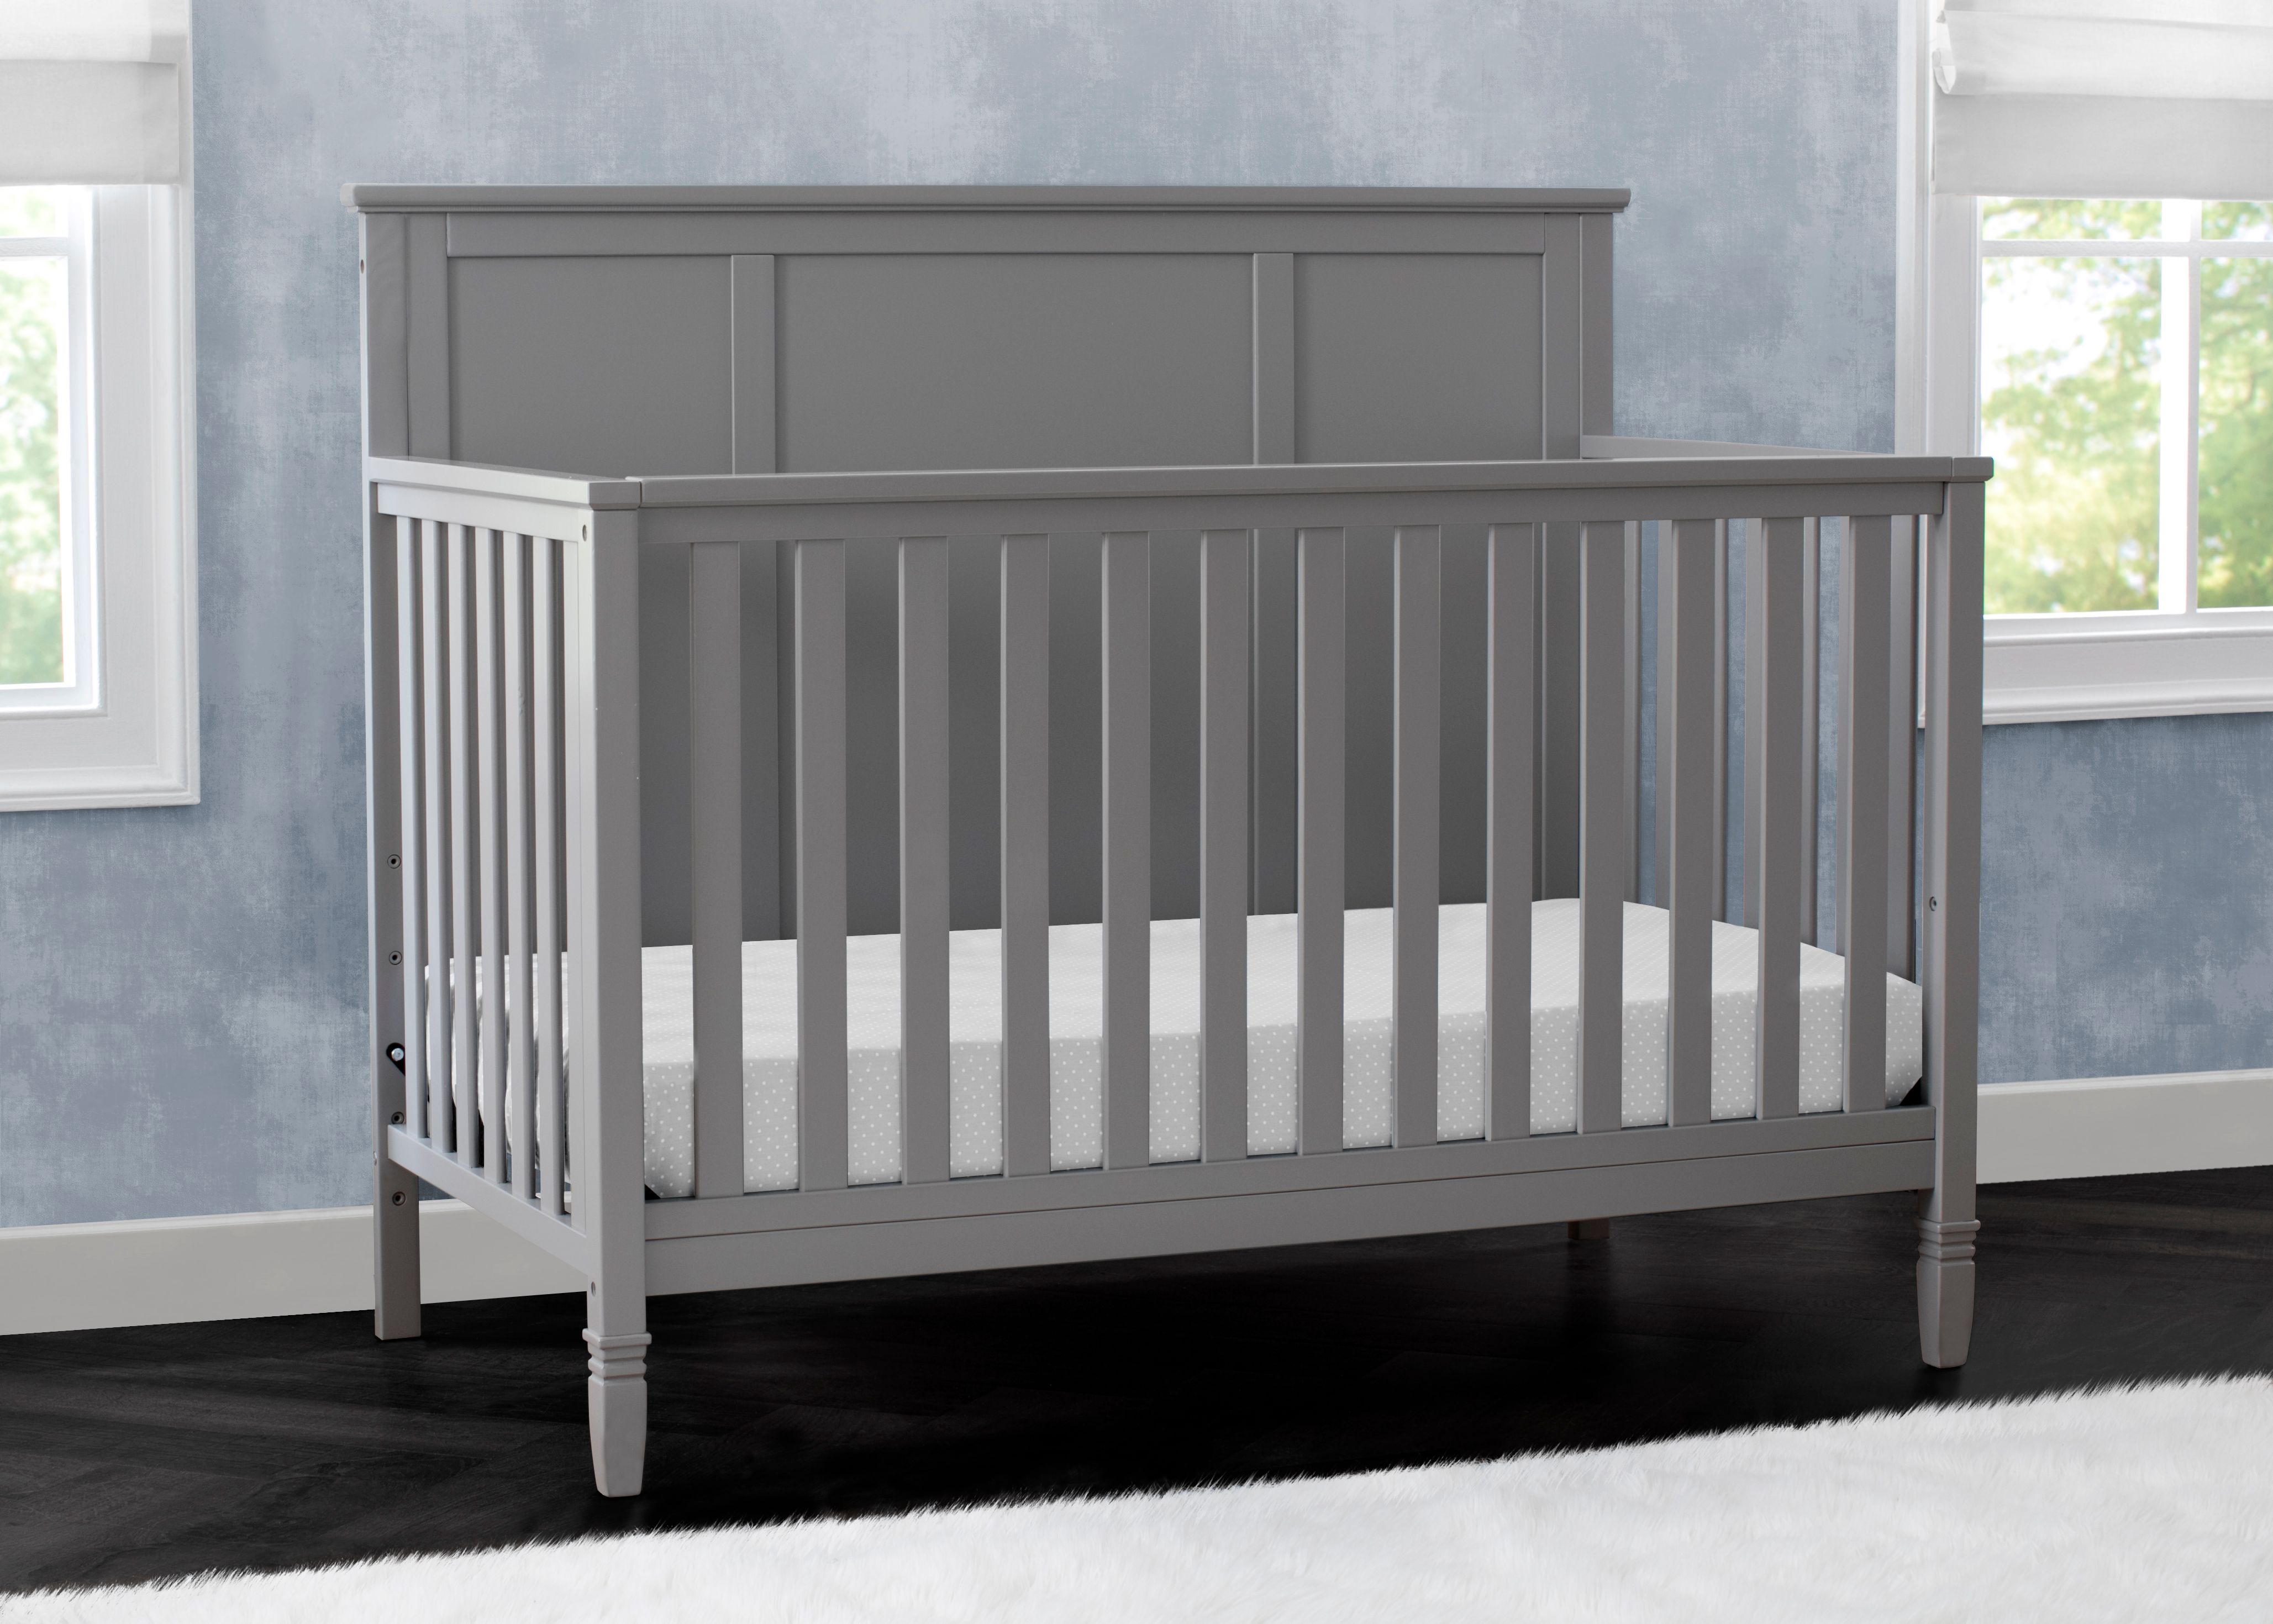 Delta Children Epic 4-in-1 Convertible Crib, Greenguard Gold Certified, Gray - image 3 of 8